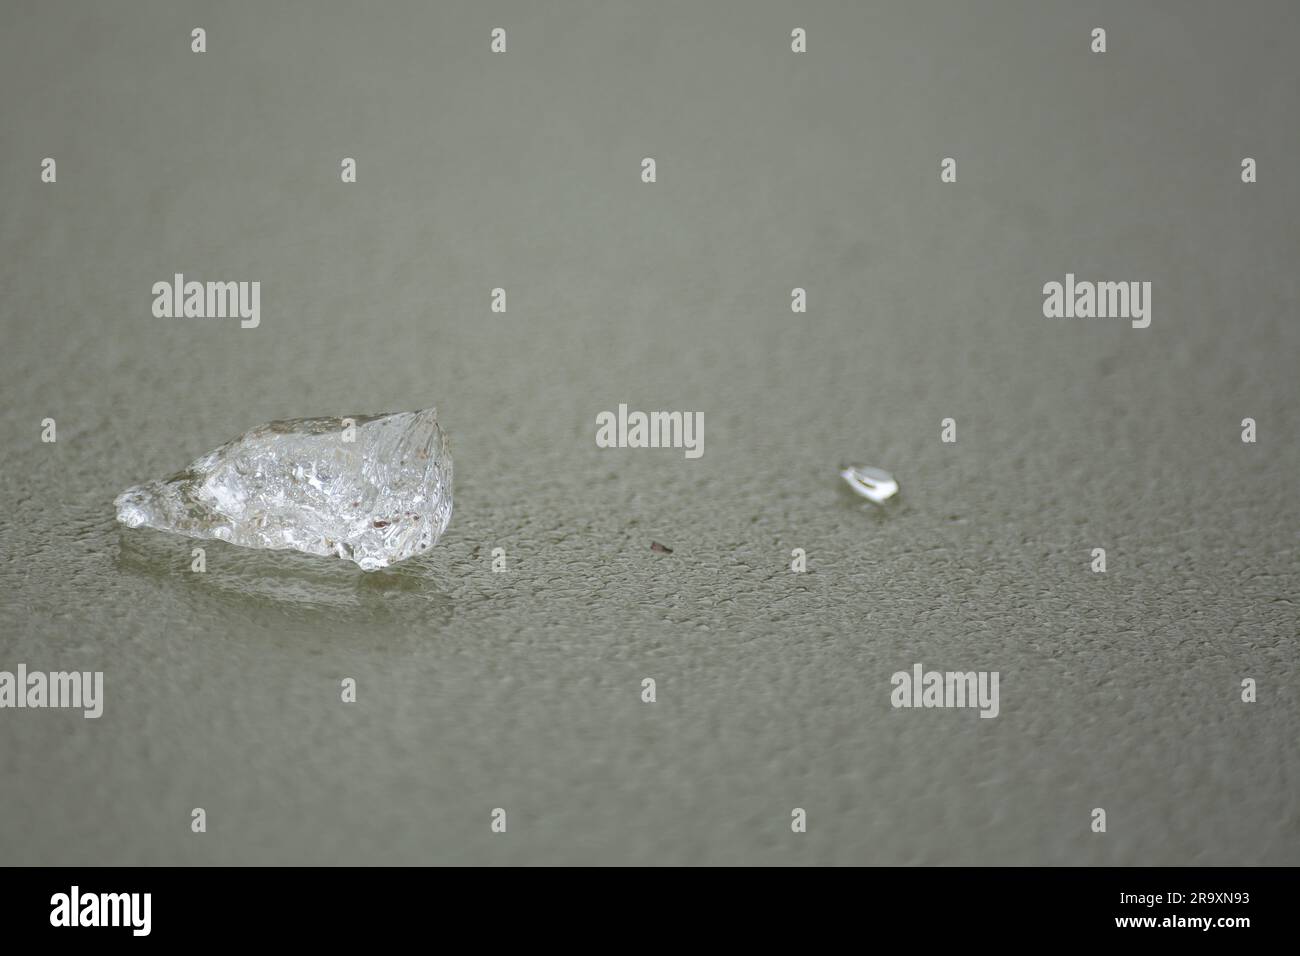 Two transparent chunks of ice on a frozen surface of water Stock Photo